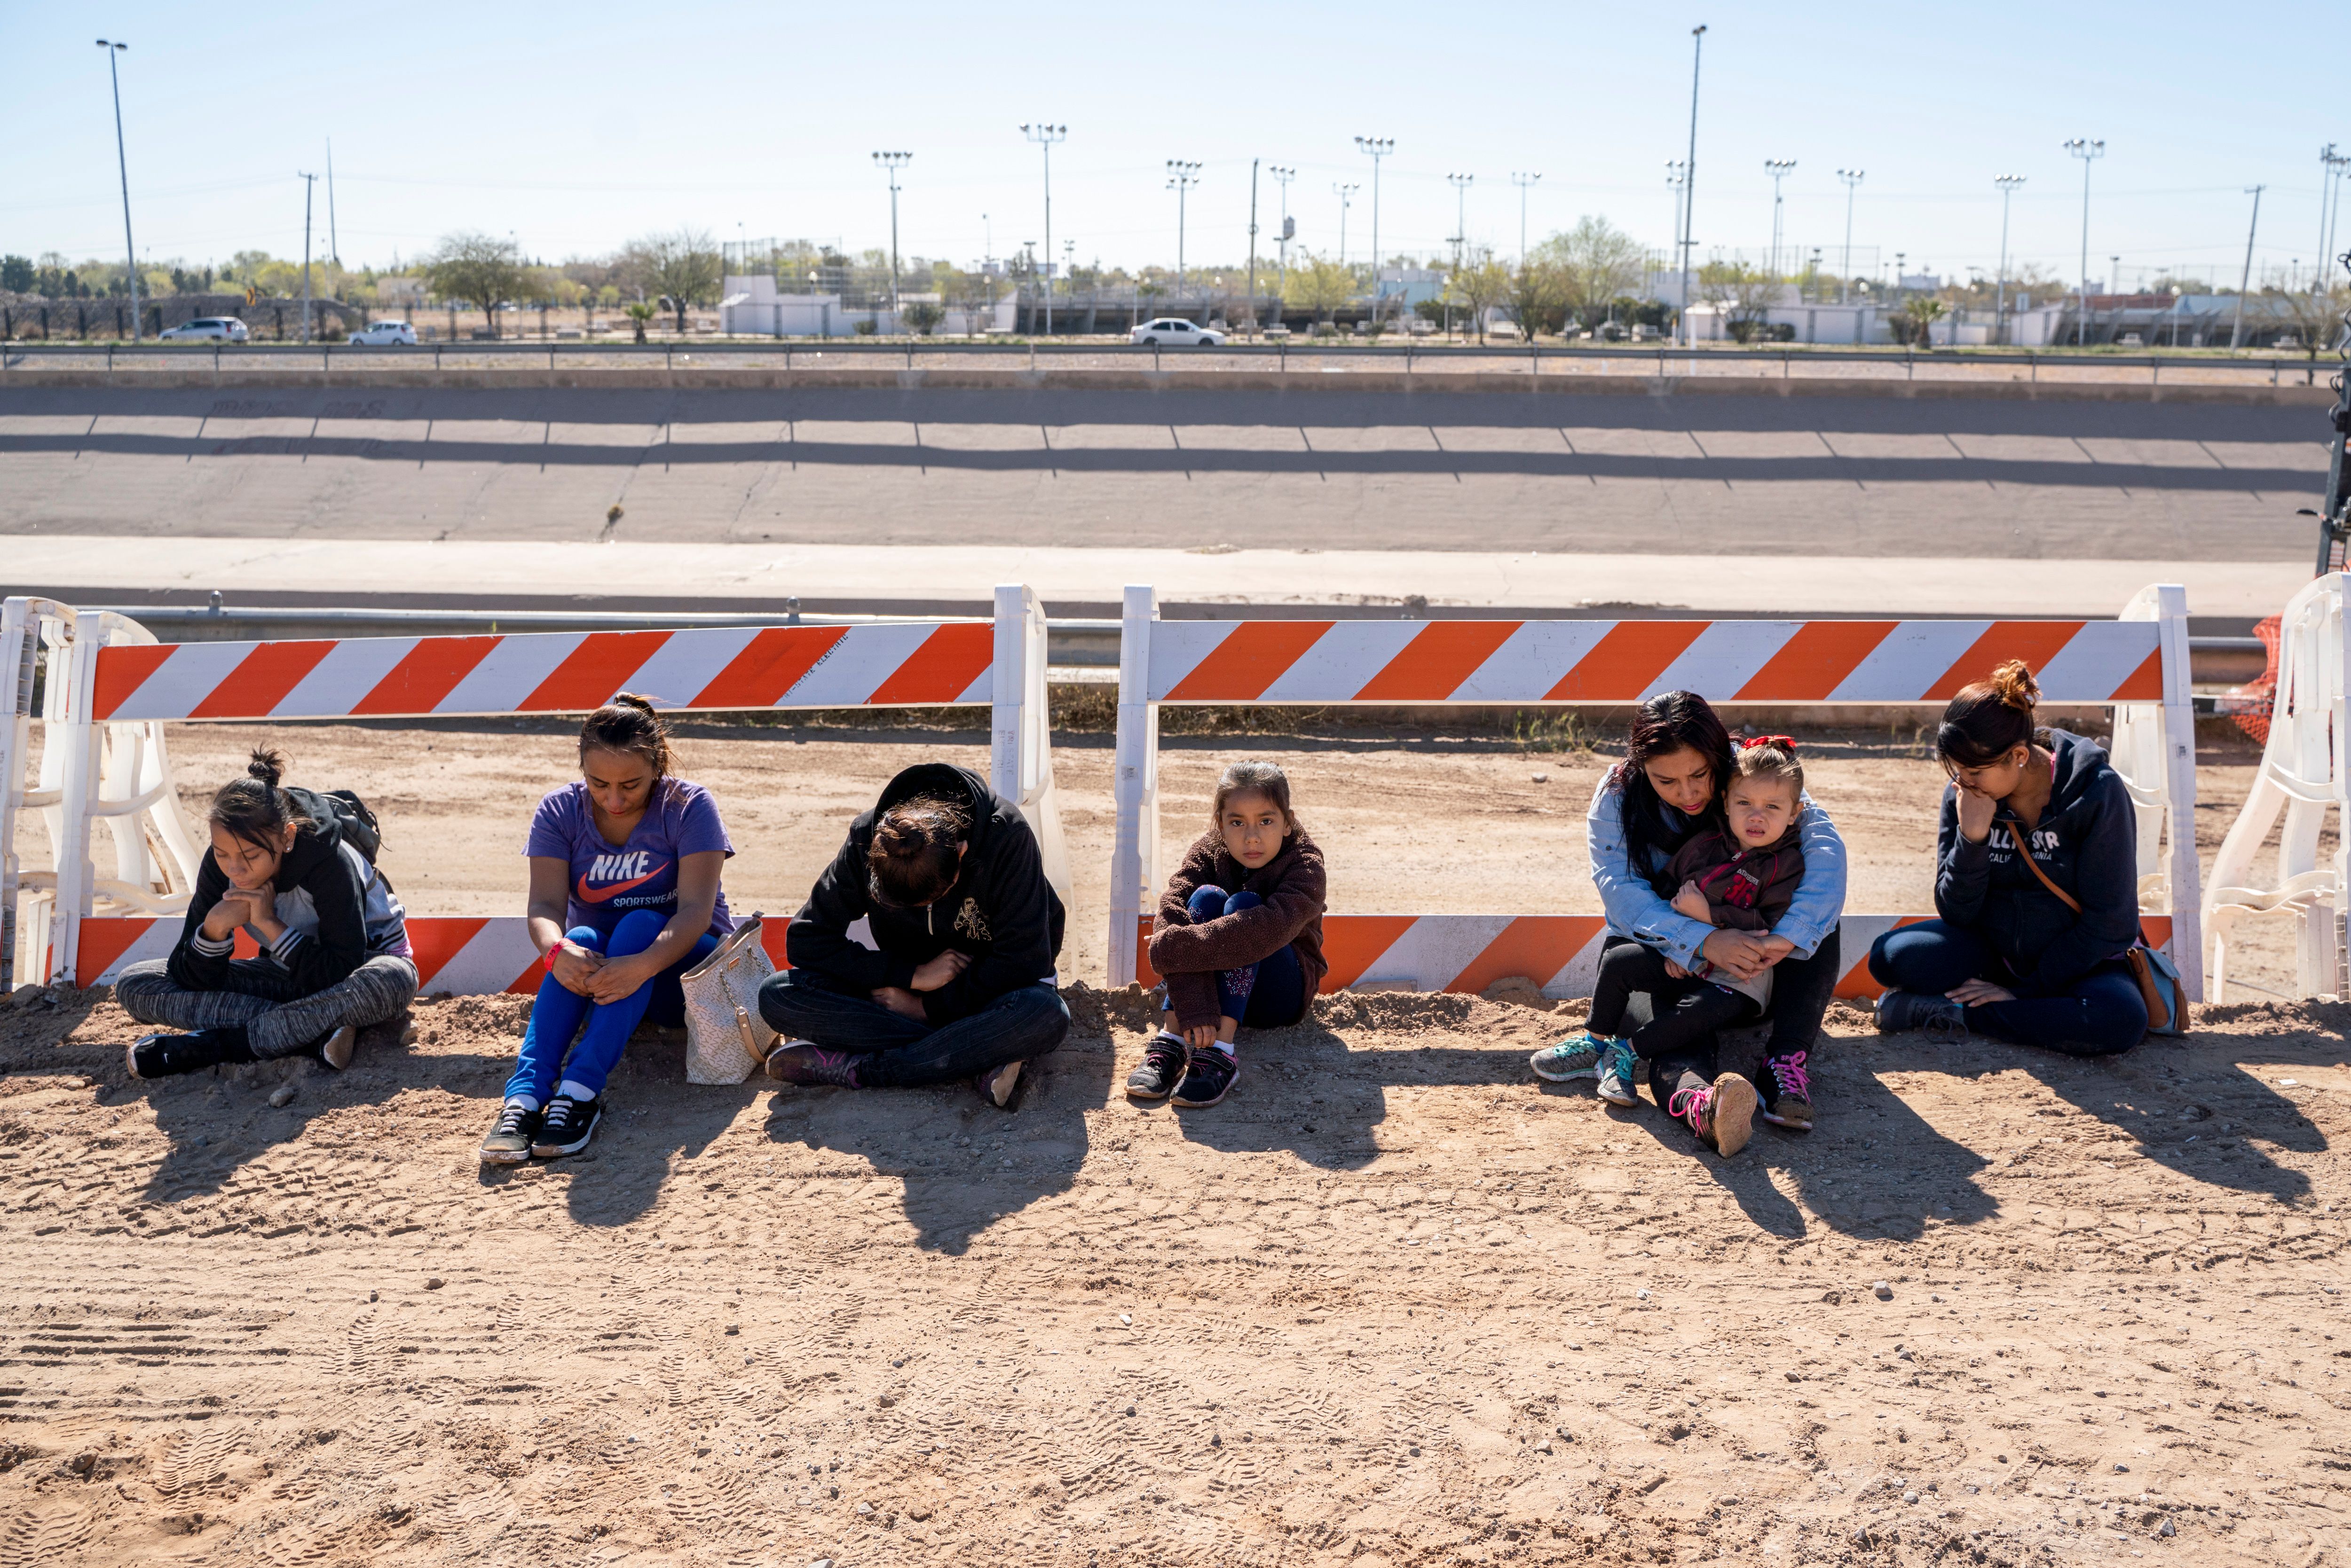 Salvadoran migrants wait for a transport to arrive after turning themselves into US Border Patrol by border fence under construction in El Paso, Texas on March 19, 2019. - Speaking of an "invasion" of illegal immigrants and criminals, US President Donald Trump last week signed the first veto of his presidency, overriding congressional opposition to secure emergency funding to build a wall on the Mexican border, the signature policy of his administration. (Photo by PAUL RATJE/AFP/Getty Images)